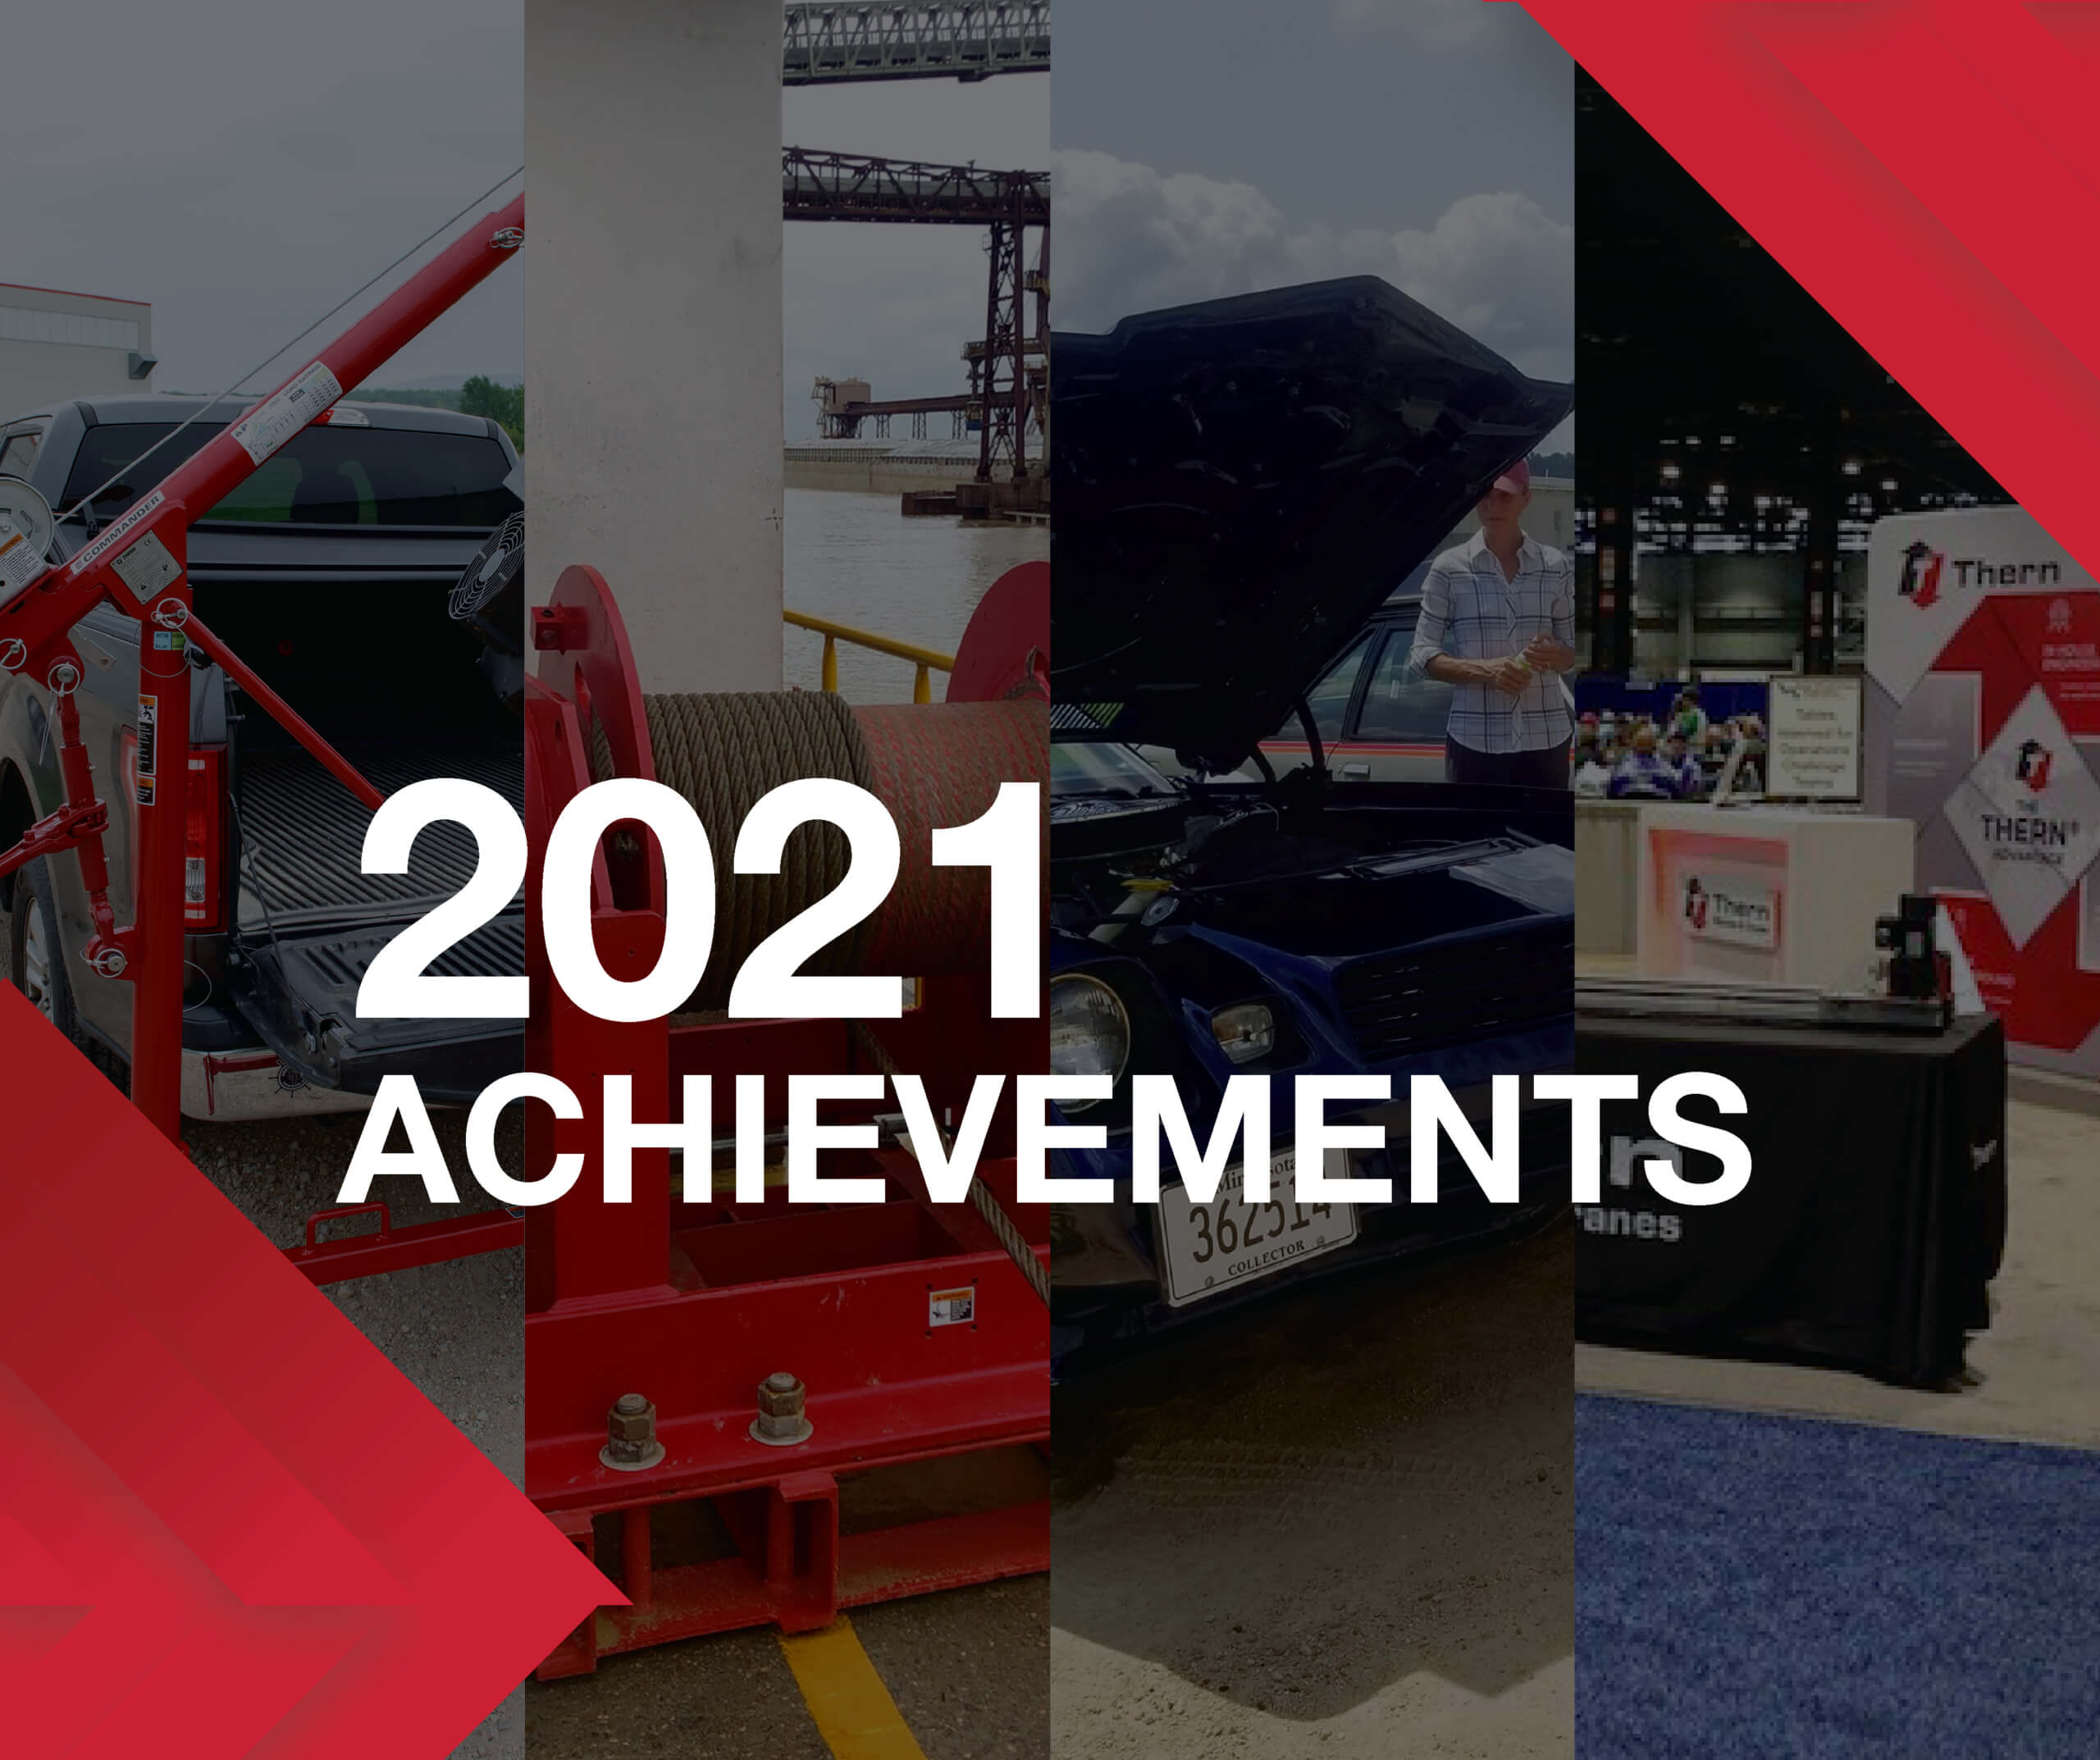 2021 Company Achievements for Thern®